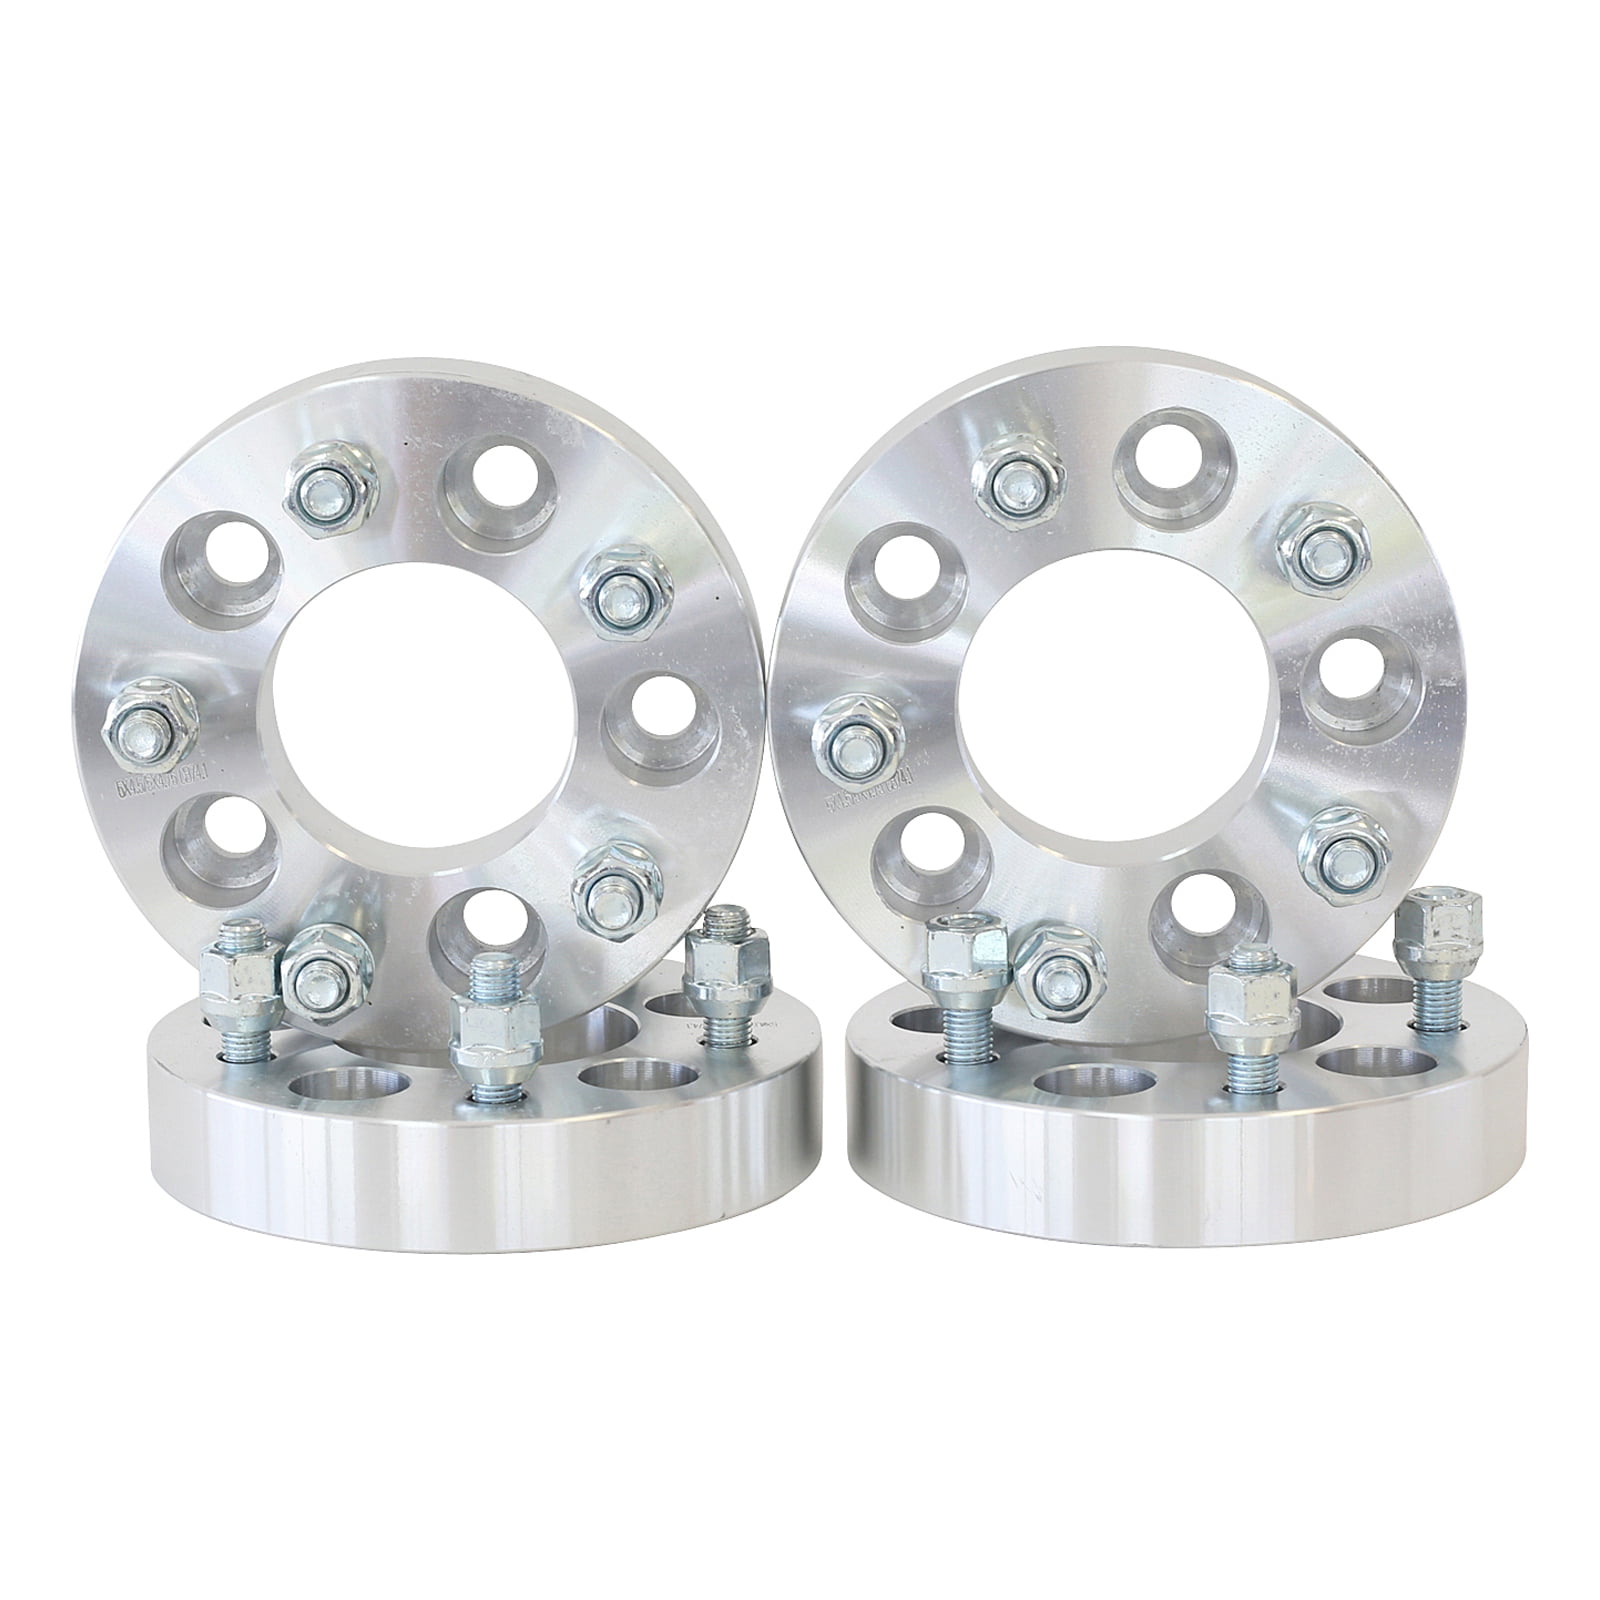 5x114.3 5x4.5 to 5x130 USA Wheel Adapters 1.25 Thick 1/2x20 Studs x 4 Spacers